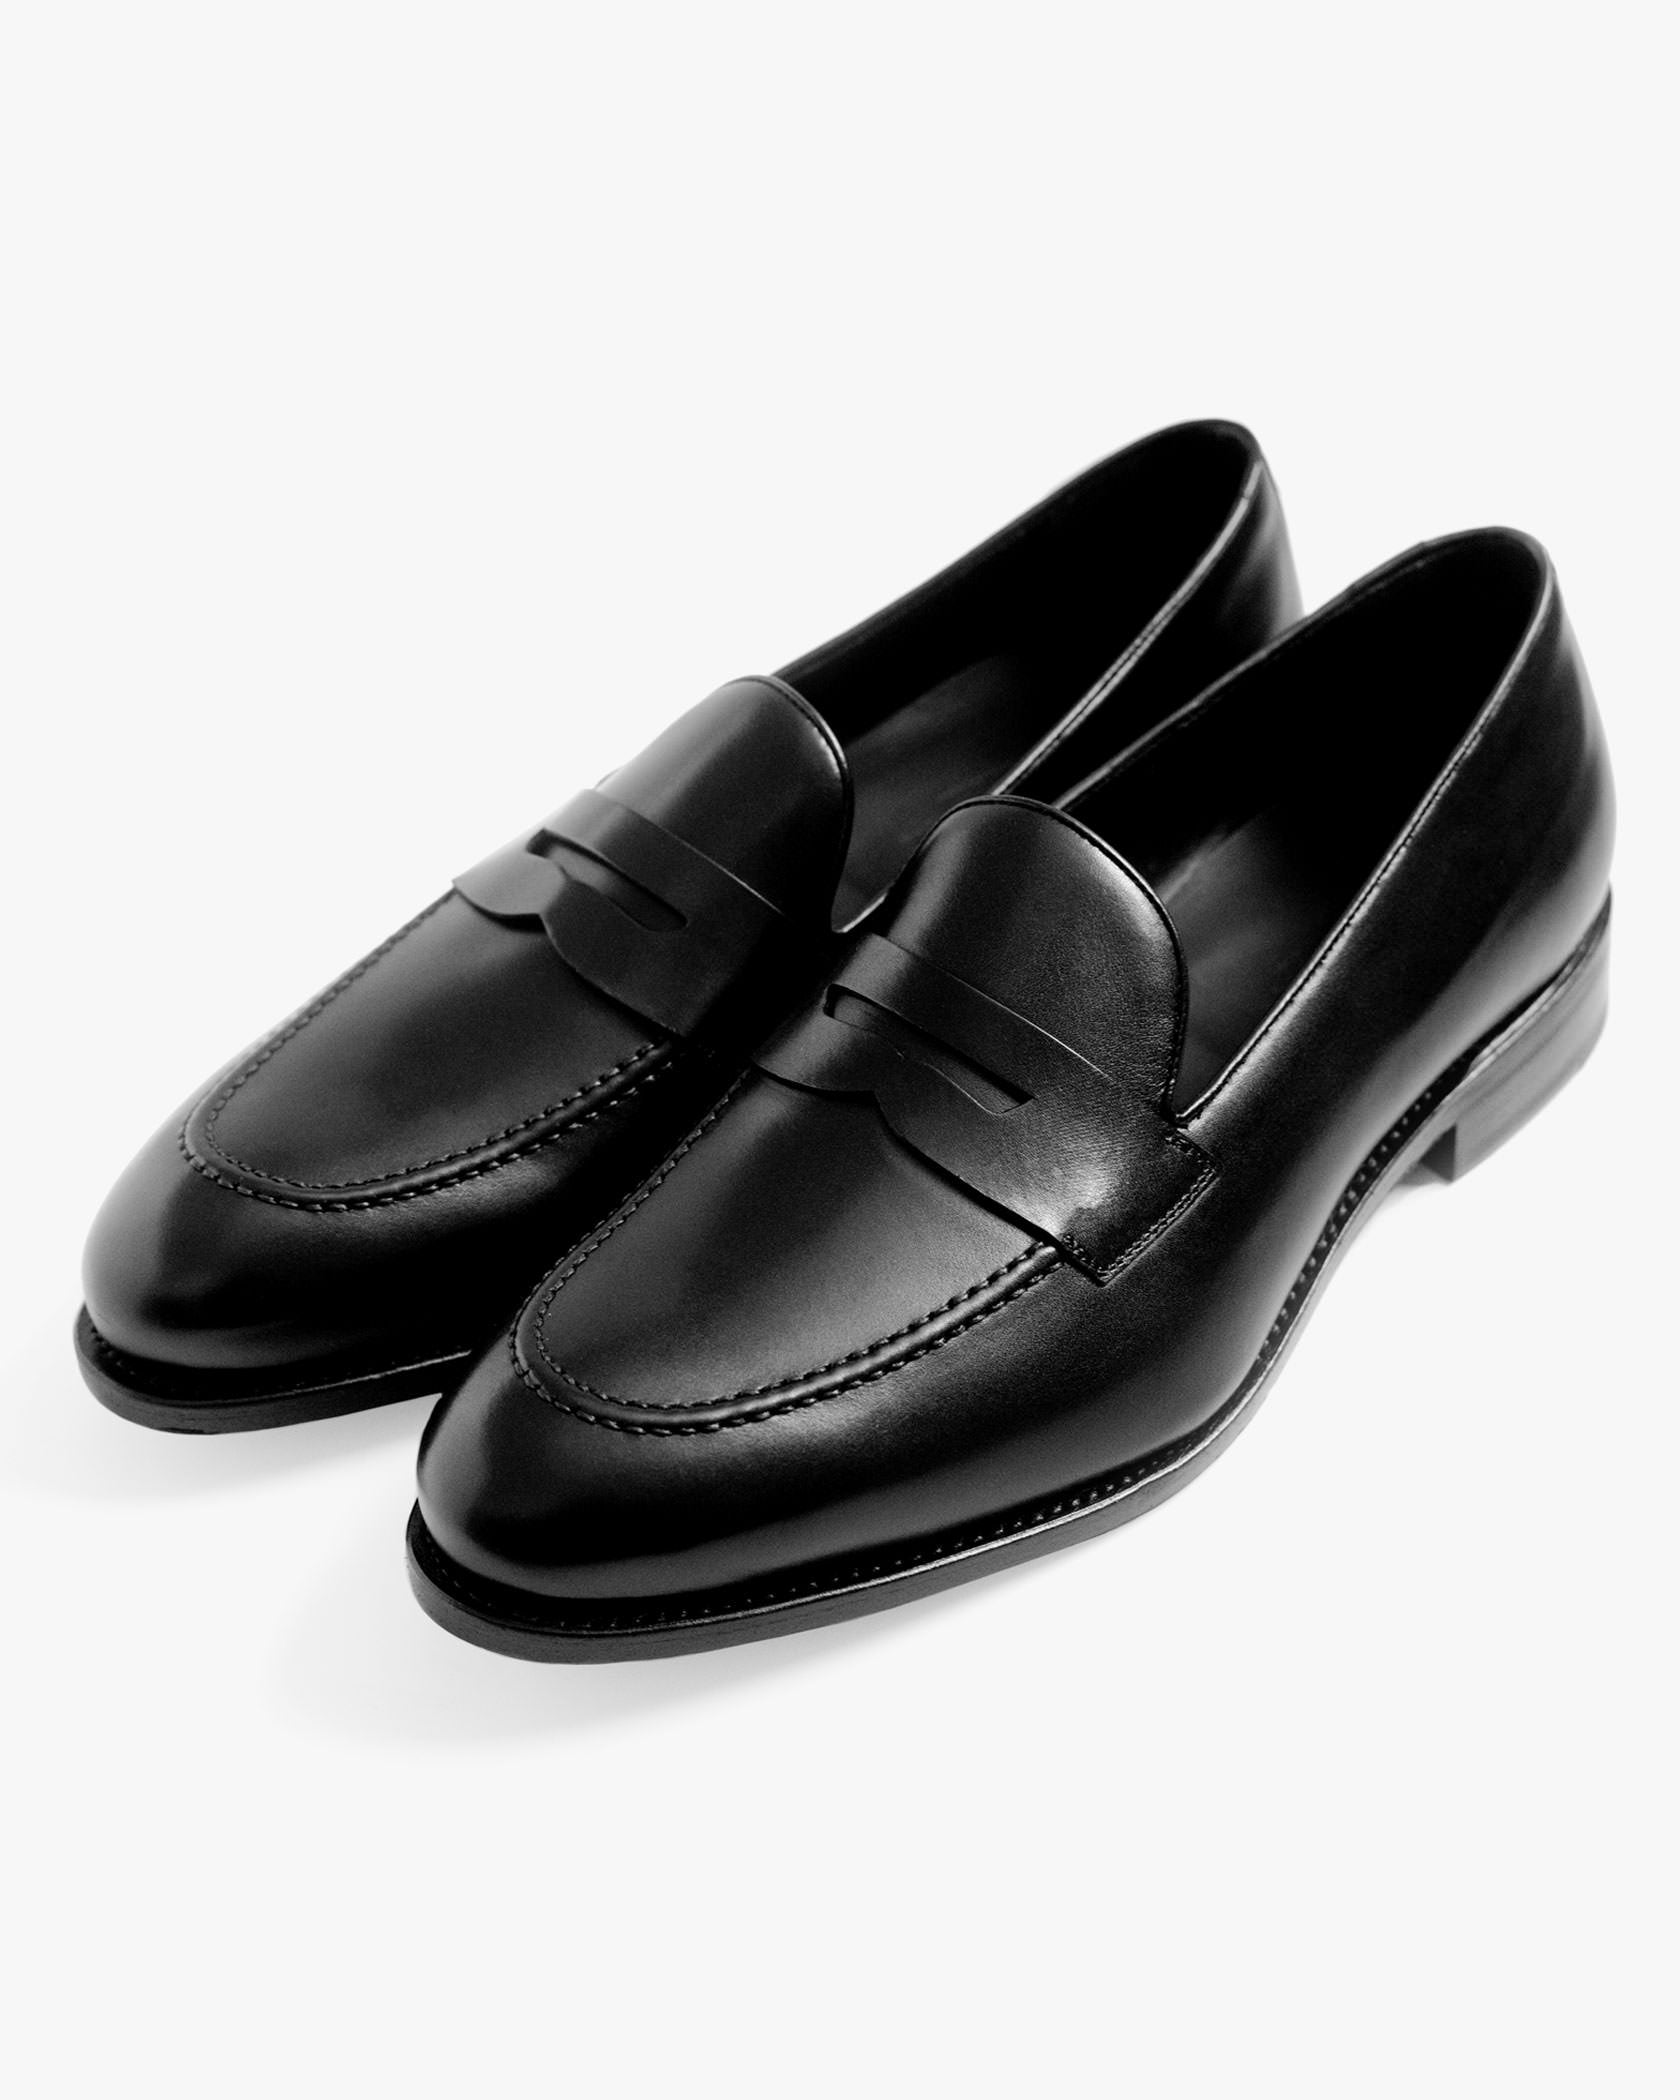 The Huckleberry Penny Loafer